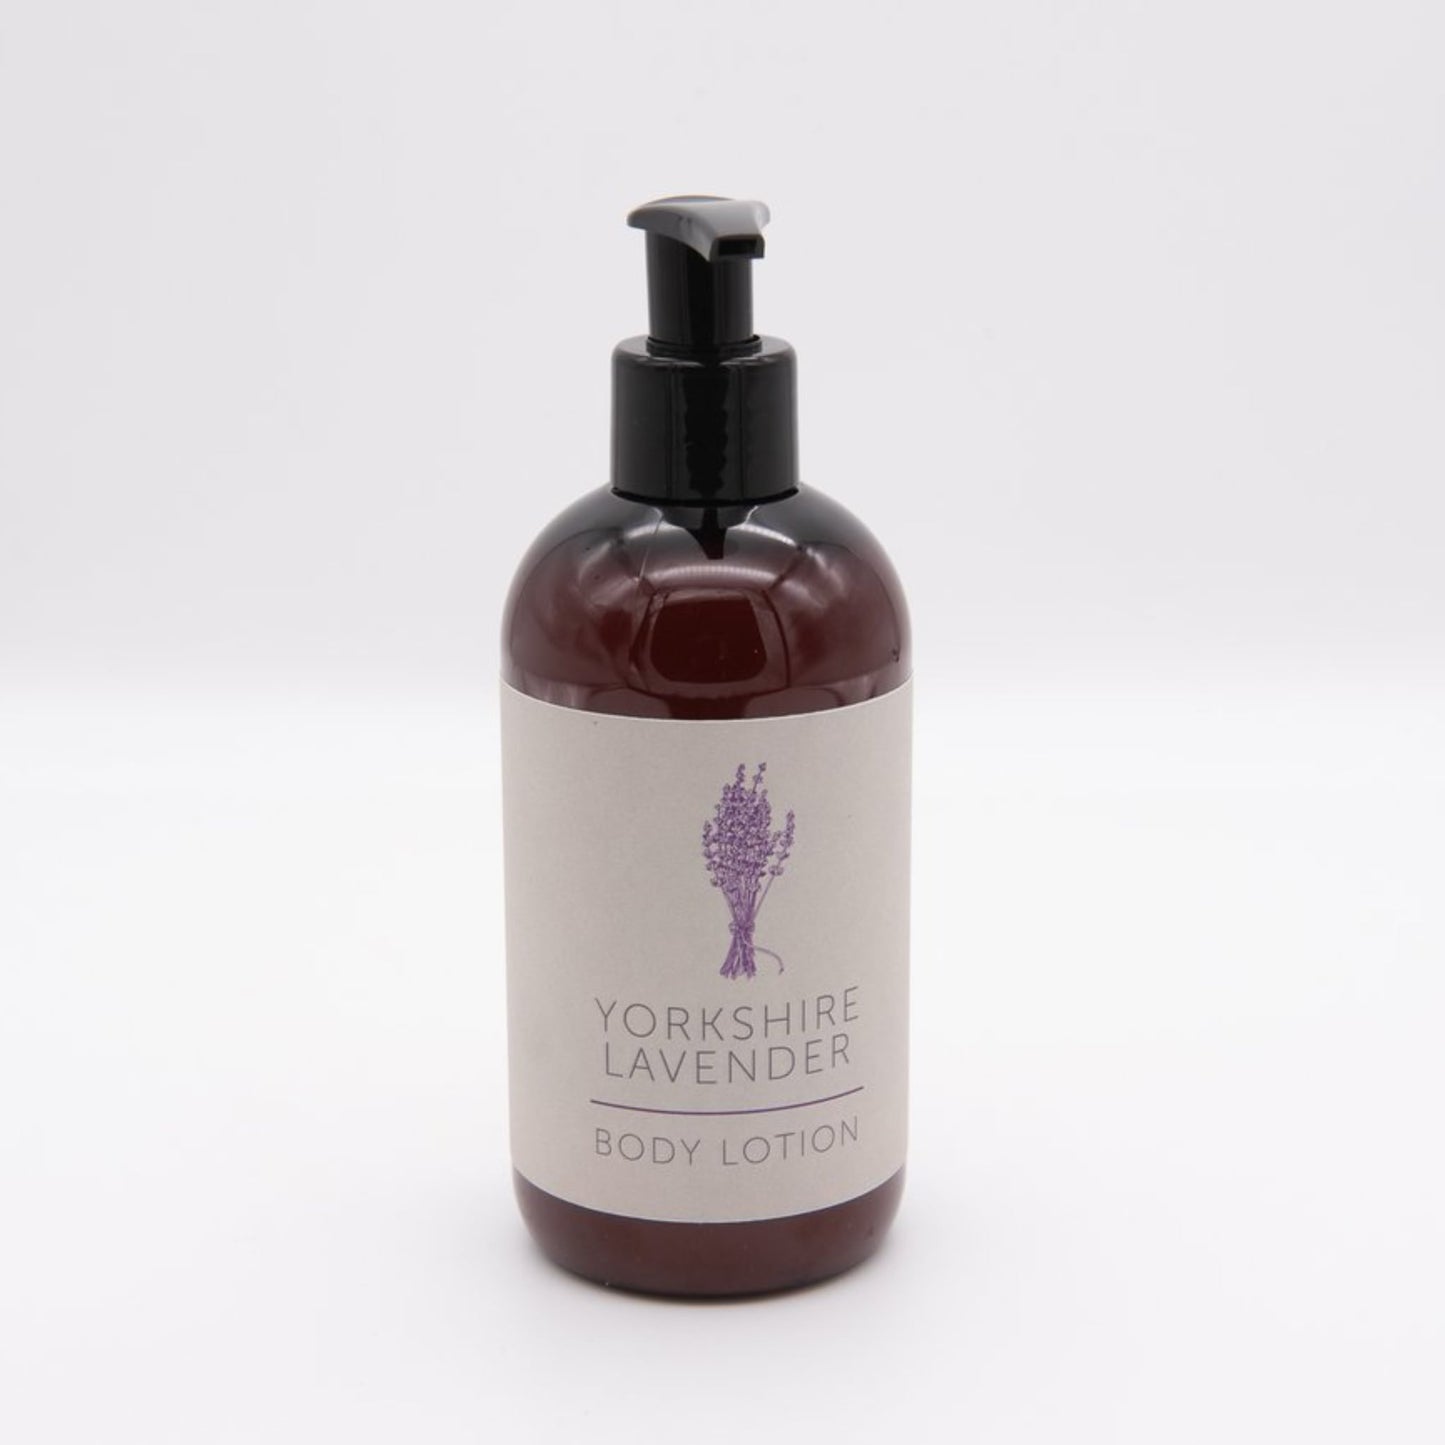 Load image into Gallery viewer, Yorkshire Lavender Body Lotion - The Great Yorkshire Shop
